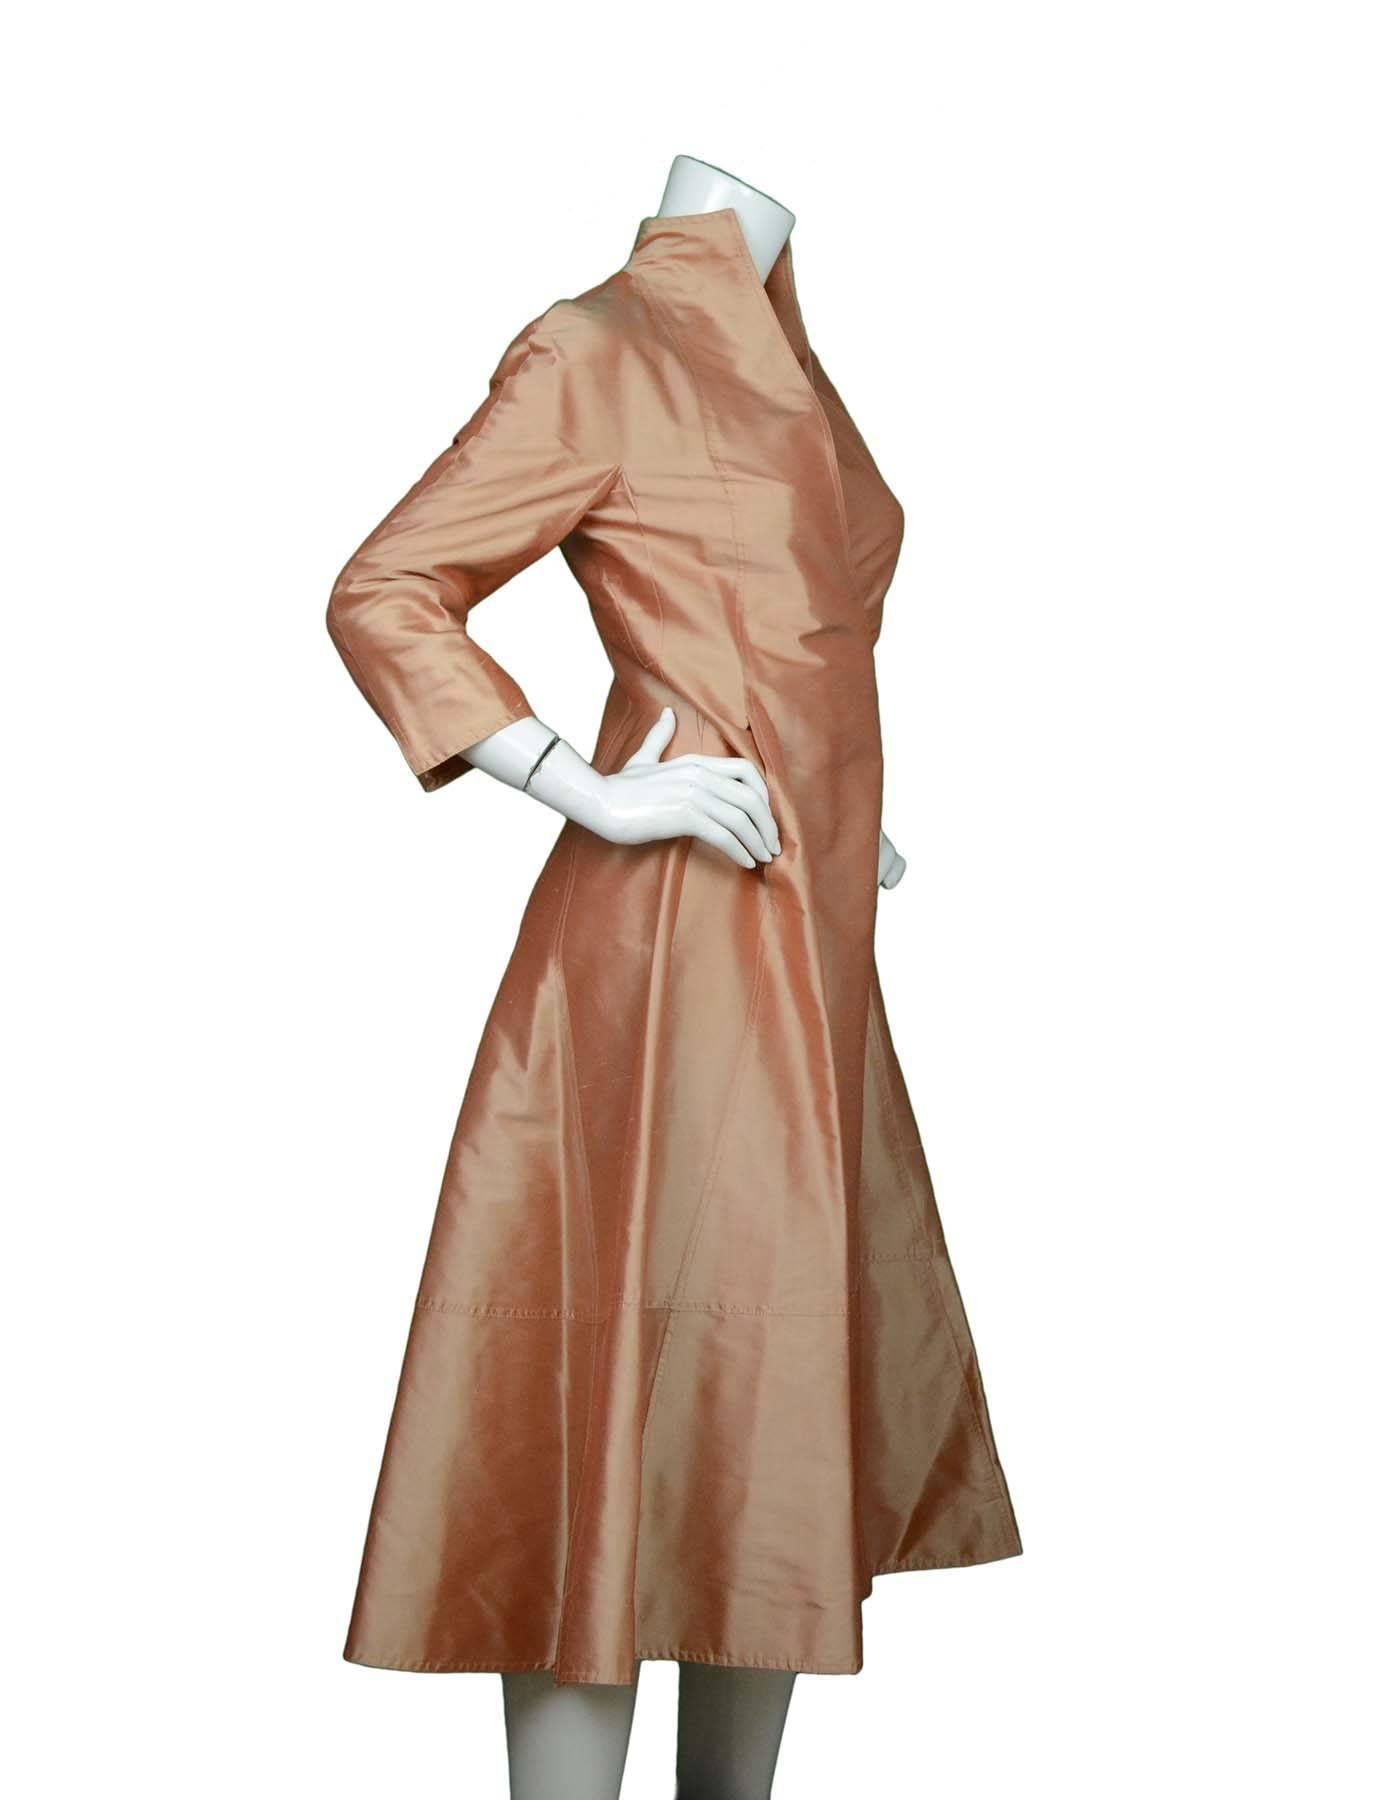 Chado Ralph Rucci Peach Silk Wrap Dress Sz 4

Features sash

Made In: USA
Color: Peach
Composition: 100% Silk
Lining: None
Exterior Pockets: Two hidden slit pockets at hips
Closure/Opening: Hidden hook and eye closure at front
Overall